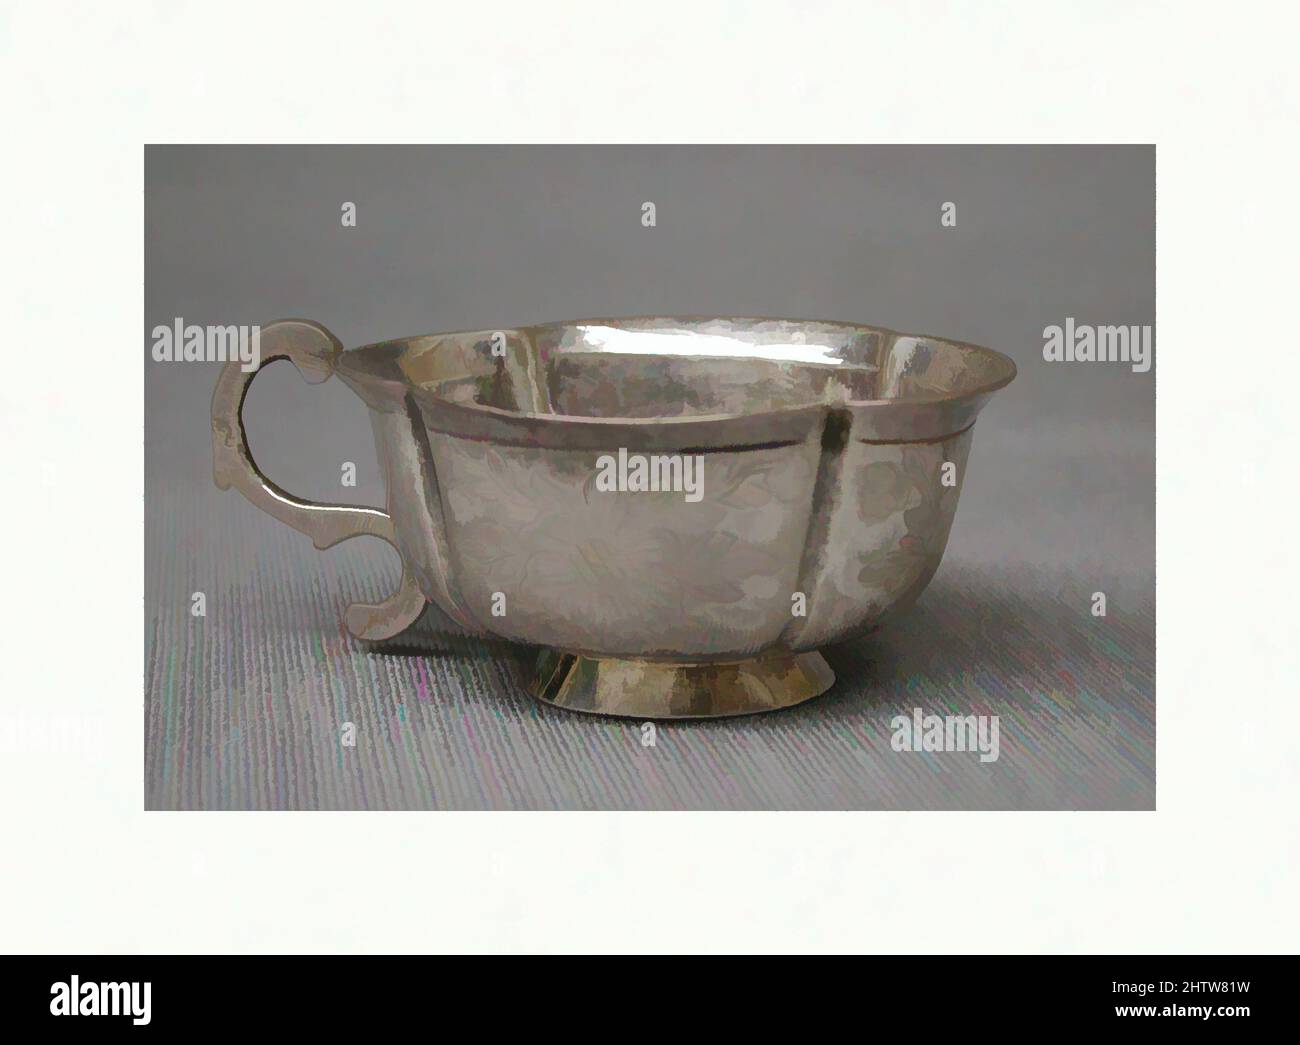 Art inspired by Cup, 1777, Russian (Moscow), Silver, H. 1 3/16 in. (4.6 cm.), Metalwork-Silver, F.G, Classic works modernized by Artotop with a splash of modernity. Shapes, color and value, eye-catching visual impact on art. Emotions through freedom of artworks in a contemporary way. A timeless message pursuing a wildly creative new direction. Artists turning to the digital medium and creating the Artotop NFT Stock Photo